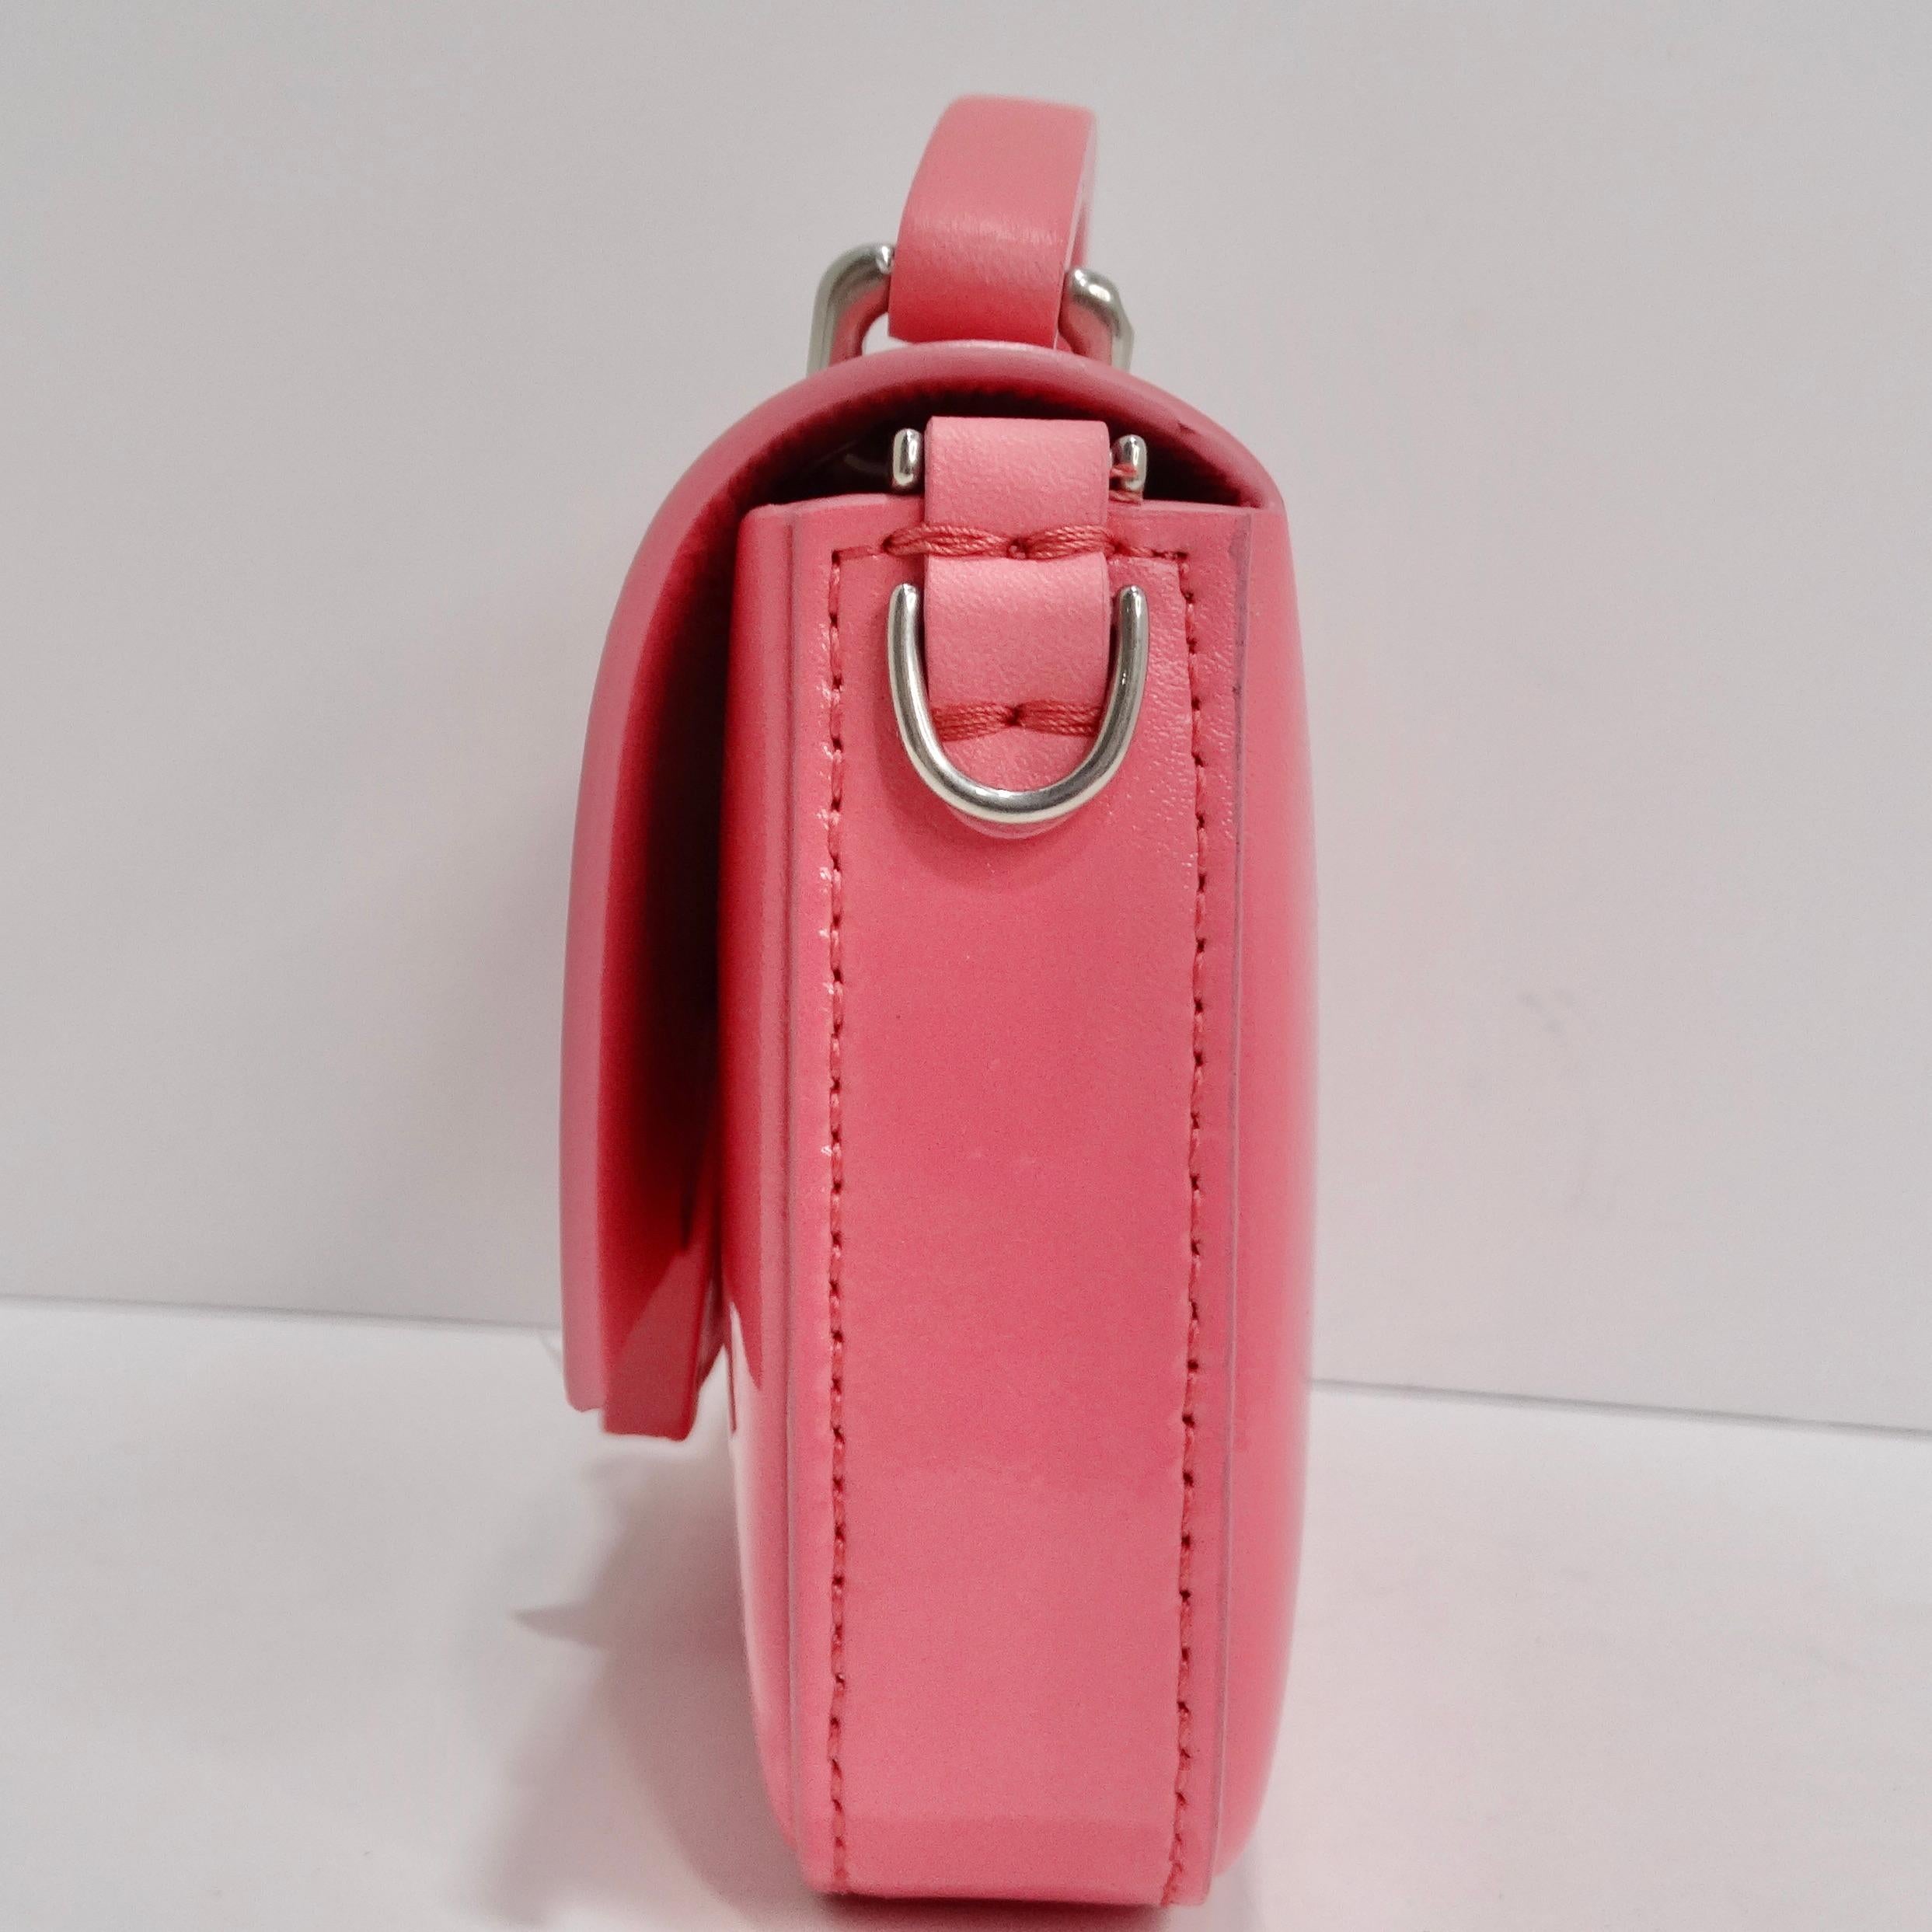 Fendi Baguette Phone Pouch Pink In Excellent Condition For Sale In Scottsdale, AZ